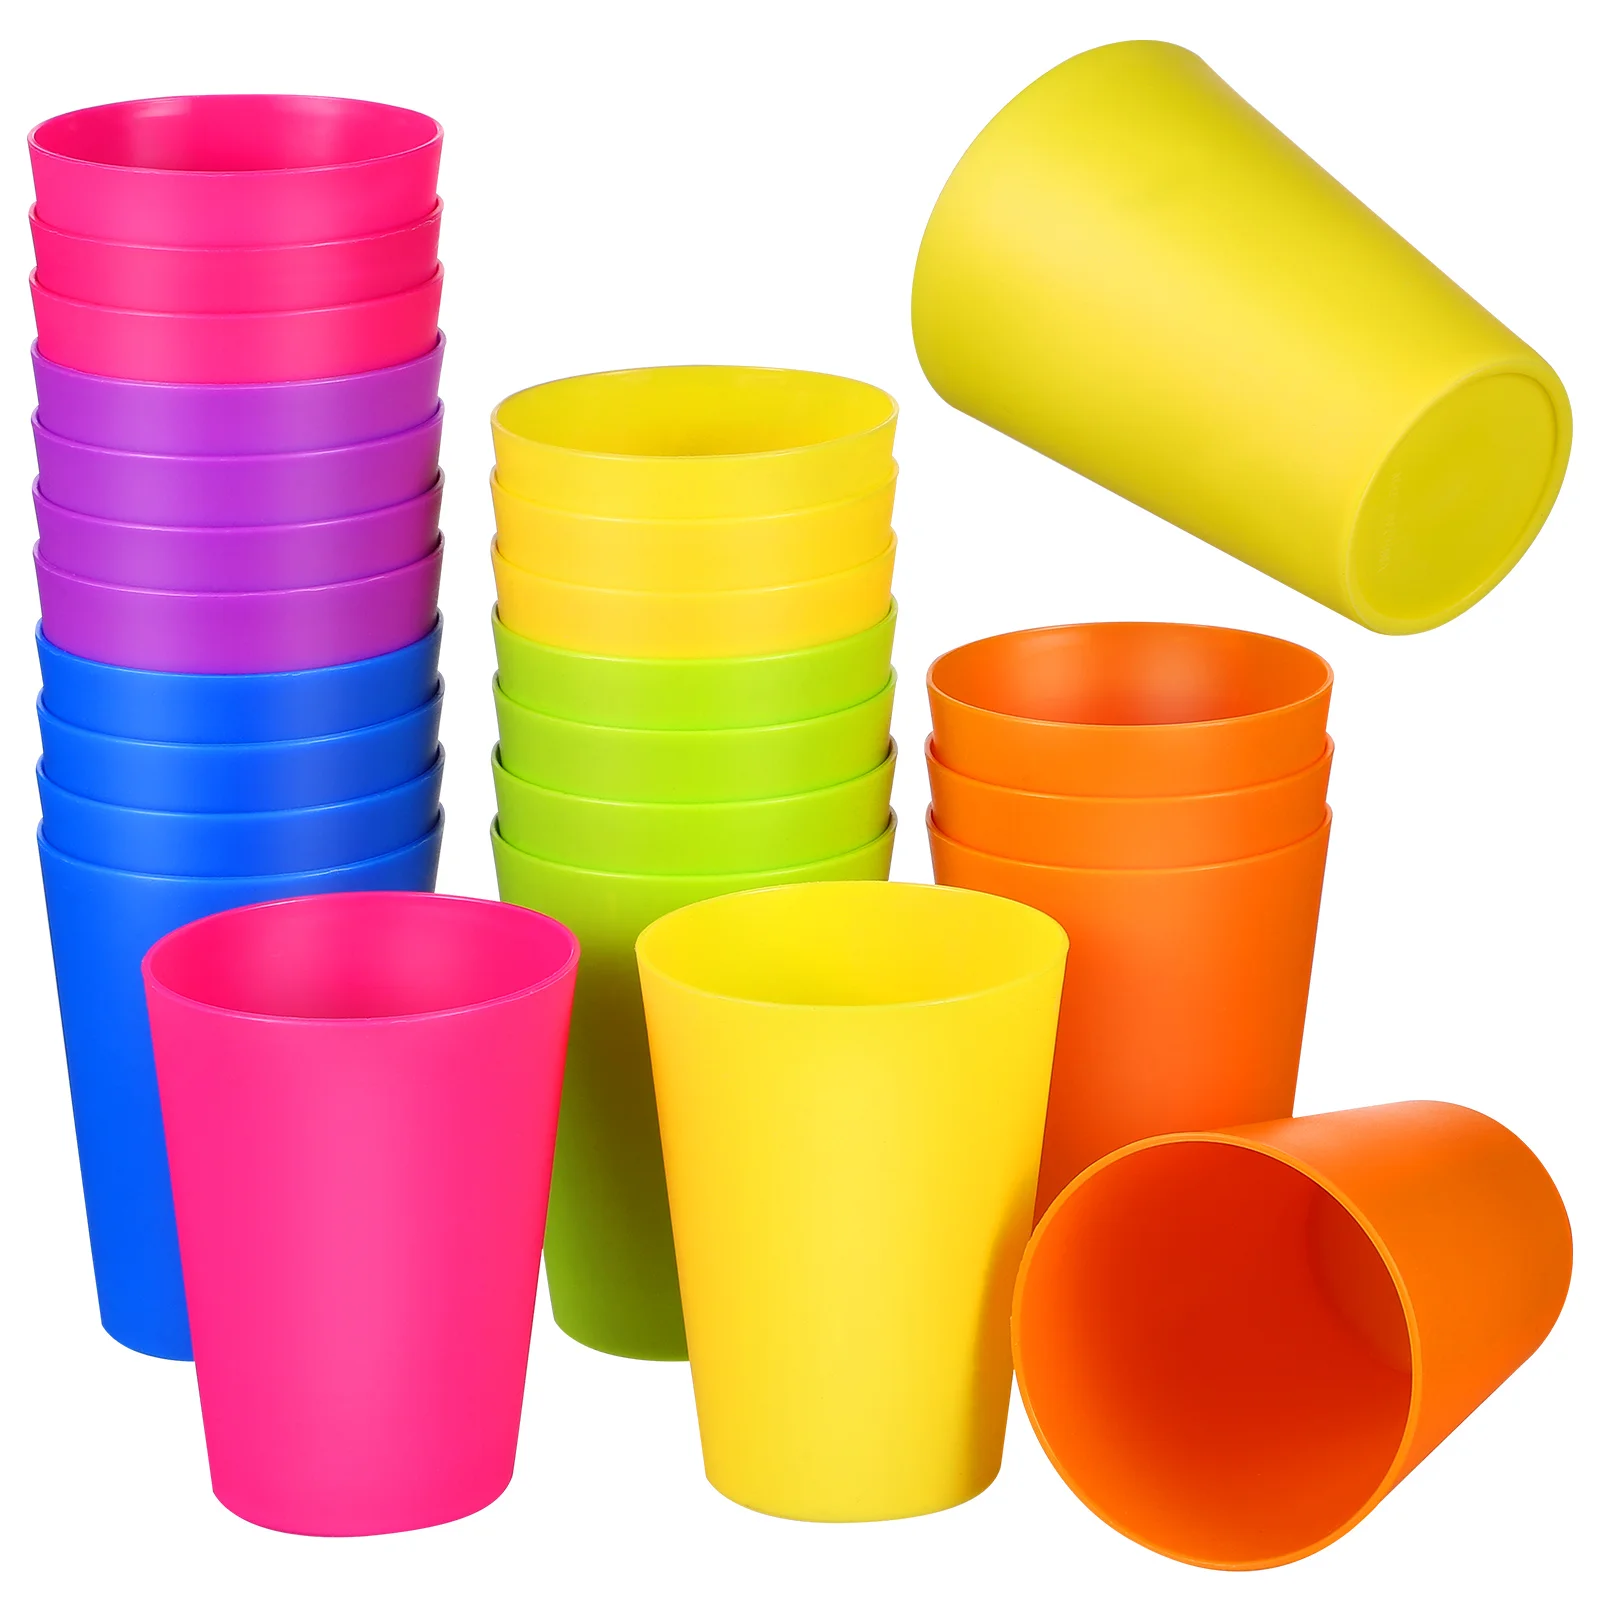 

24 Pcs Reusable Stackable Lightweight Safe Plastic Cups Bear Cups Beverage Cups Drinking Cups